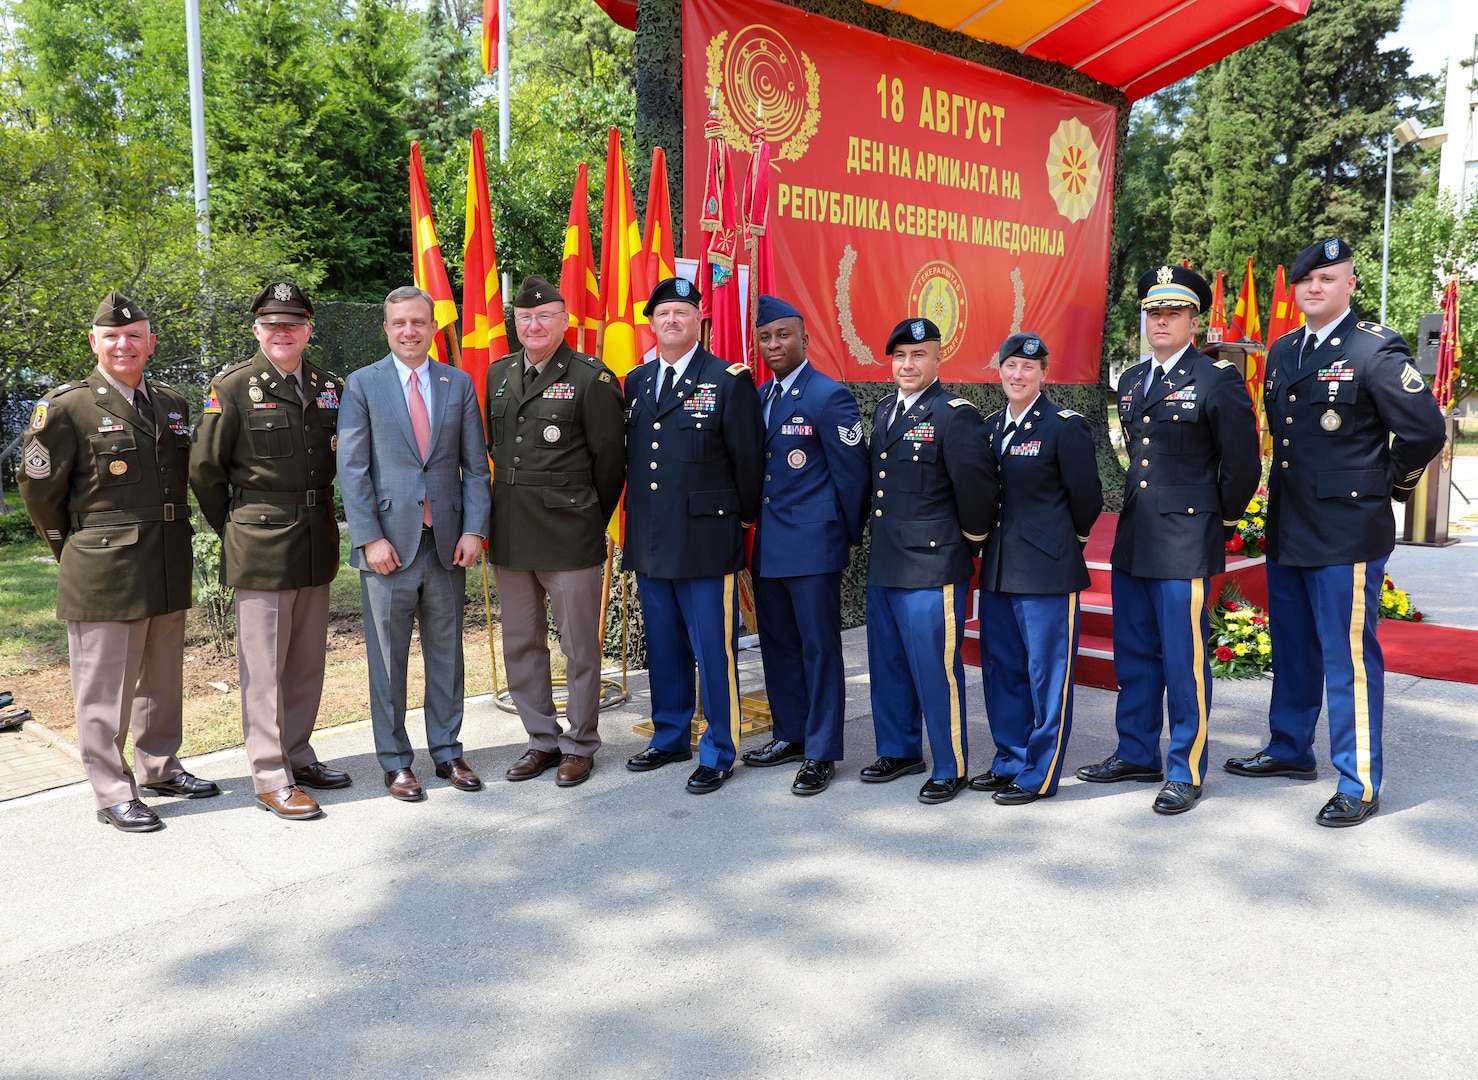 Members of the Vermont National Guard attend a celebration for Army Day at the Ministry of Defense in Skopje, North Macedonia, Aug. 18, 2021. The holiday commemorates the creation of the Mirče Acev battalion in 1943. The battalion laid the foundation of the People's Liberation Army of Macedonia that fought against the Axis forces during WWII.